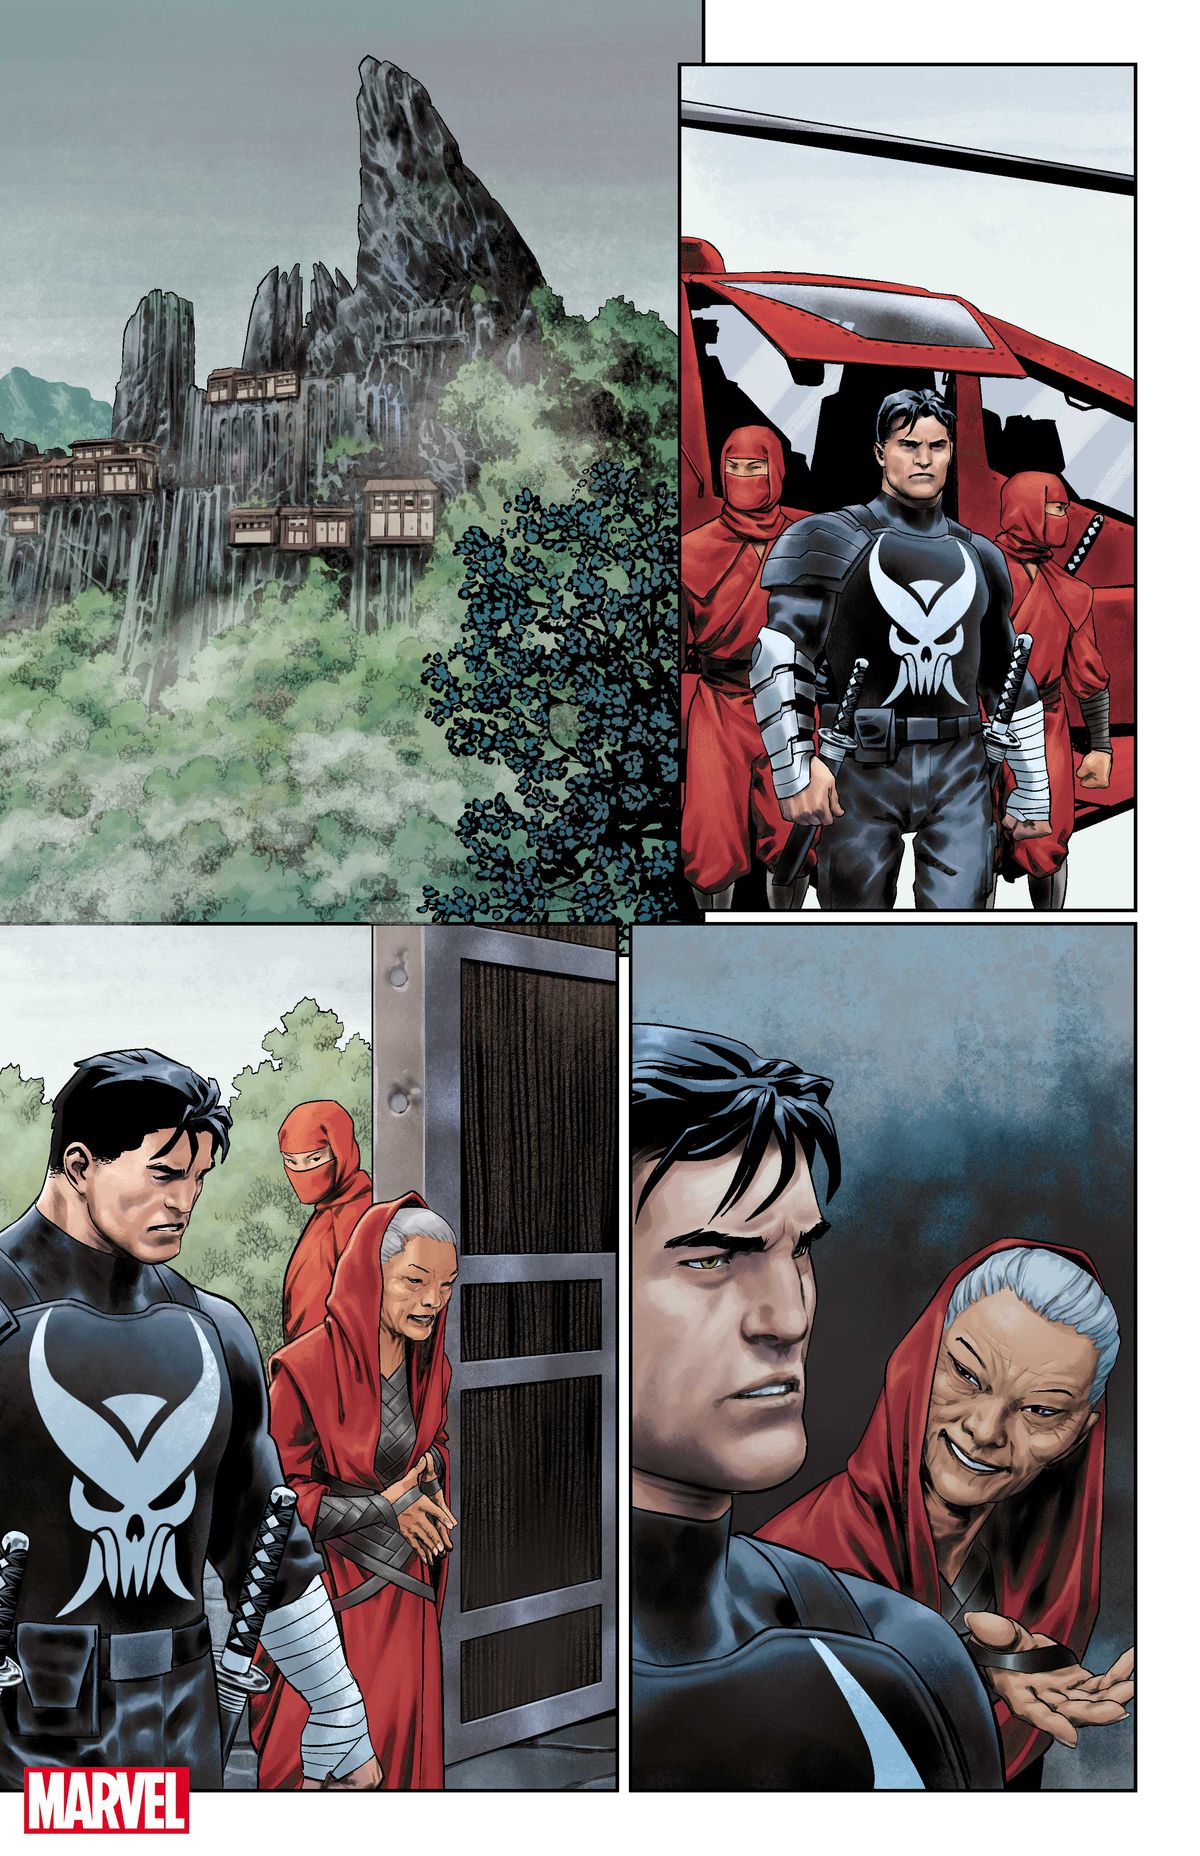 Frank Castle steps out of a red helicopter flanked by red ninjas, and greets an old woman wearing red — the skull on his costume has wicked fangs and sharp horns. Unfinished page from Punisher #1 (2022). 